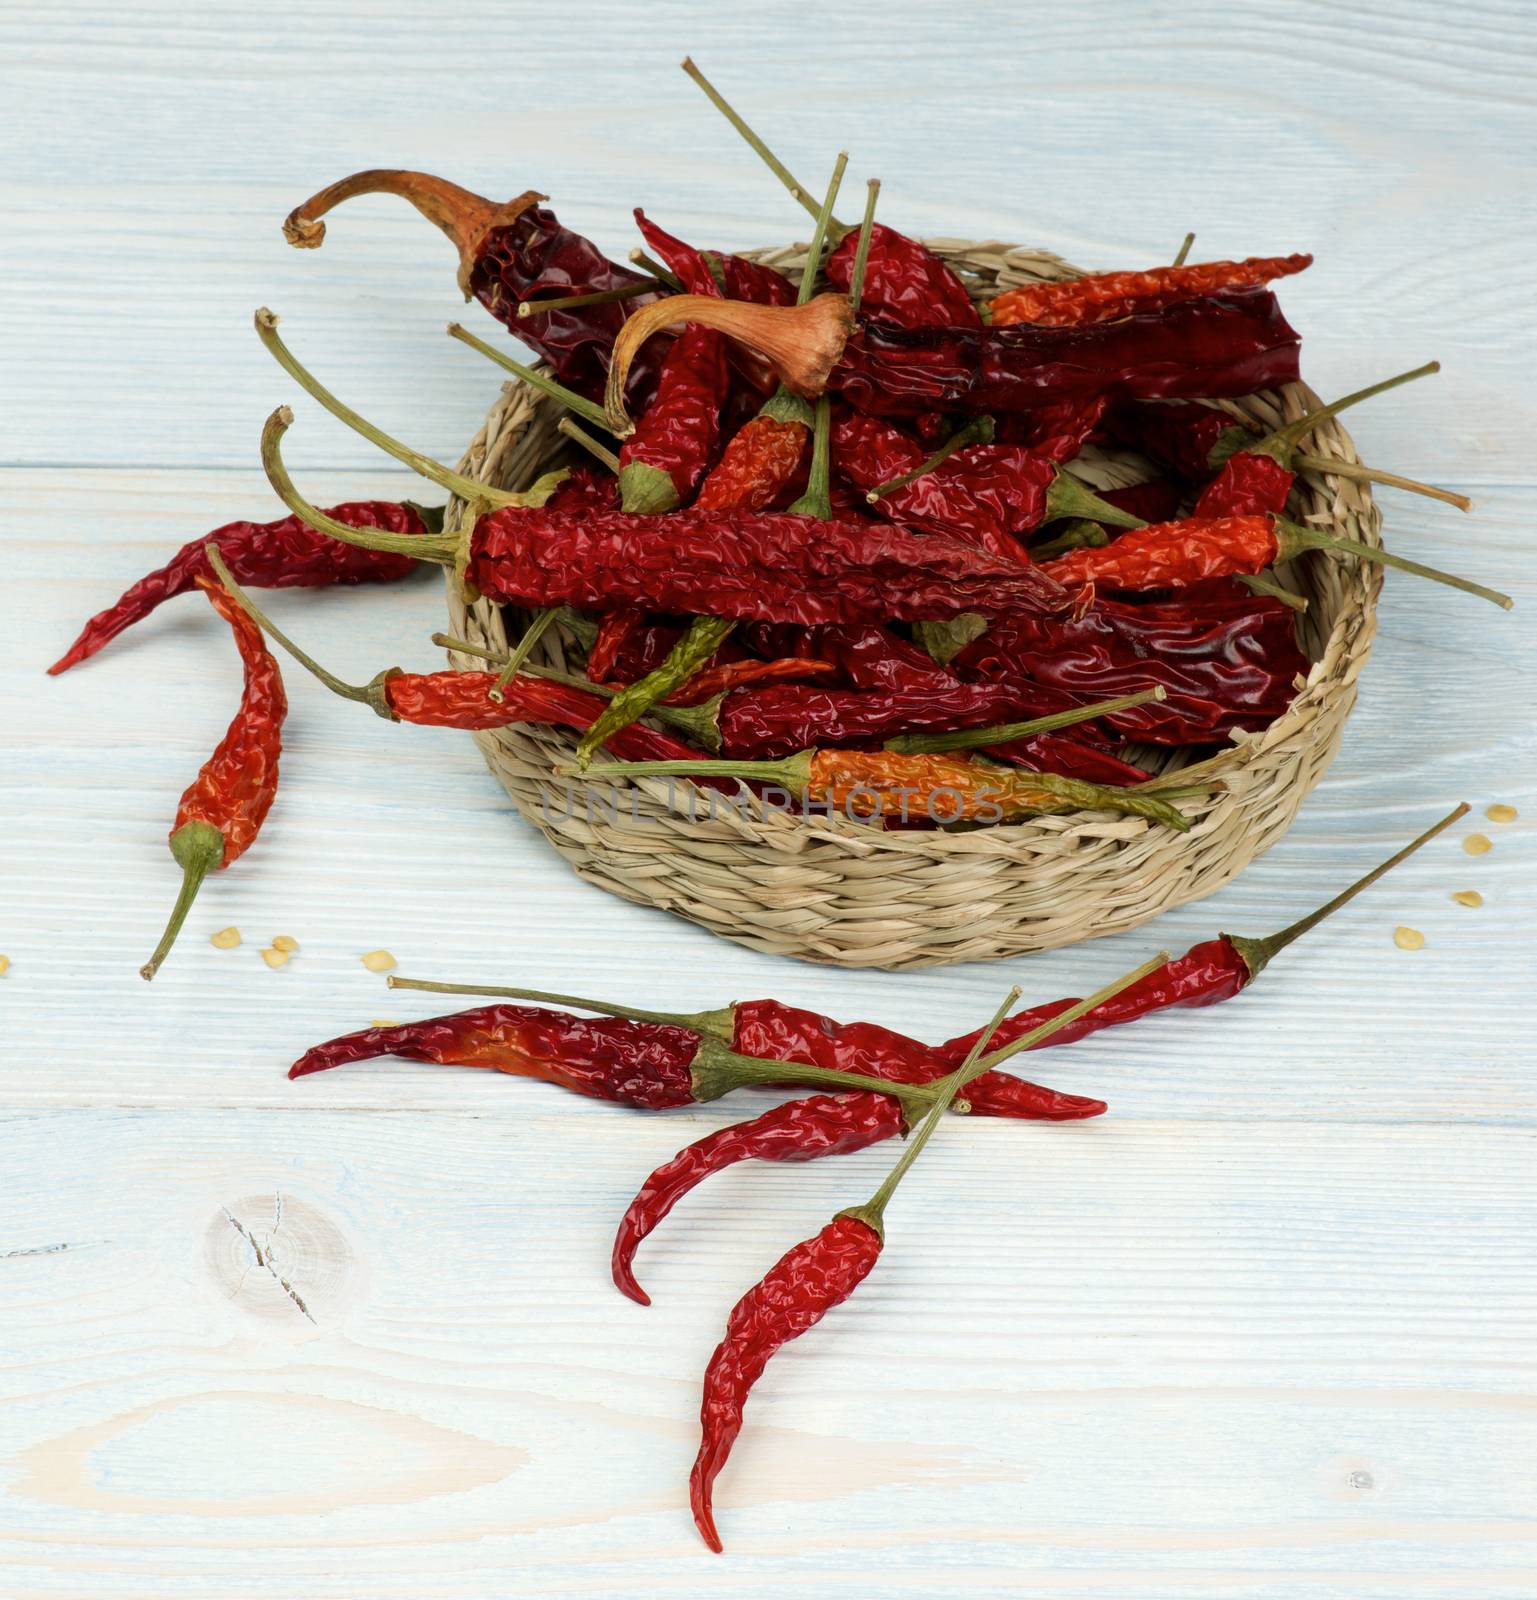 Dried Chili Peppers by zhekos